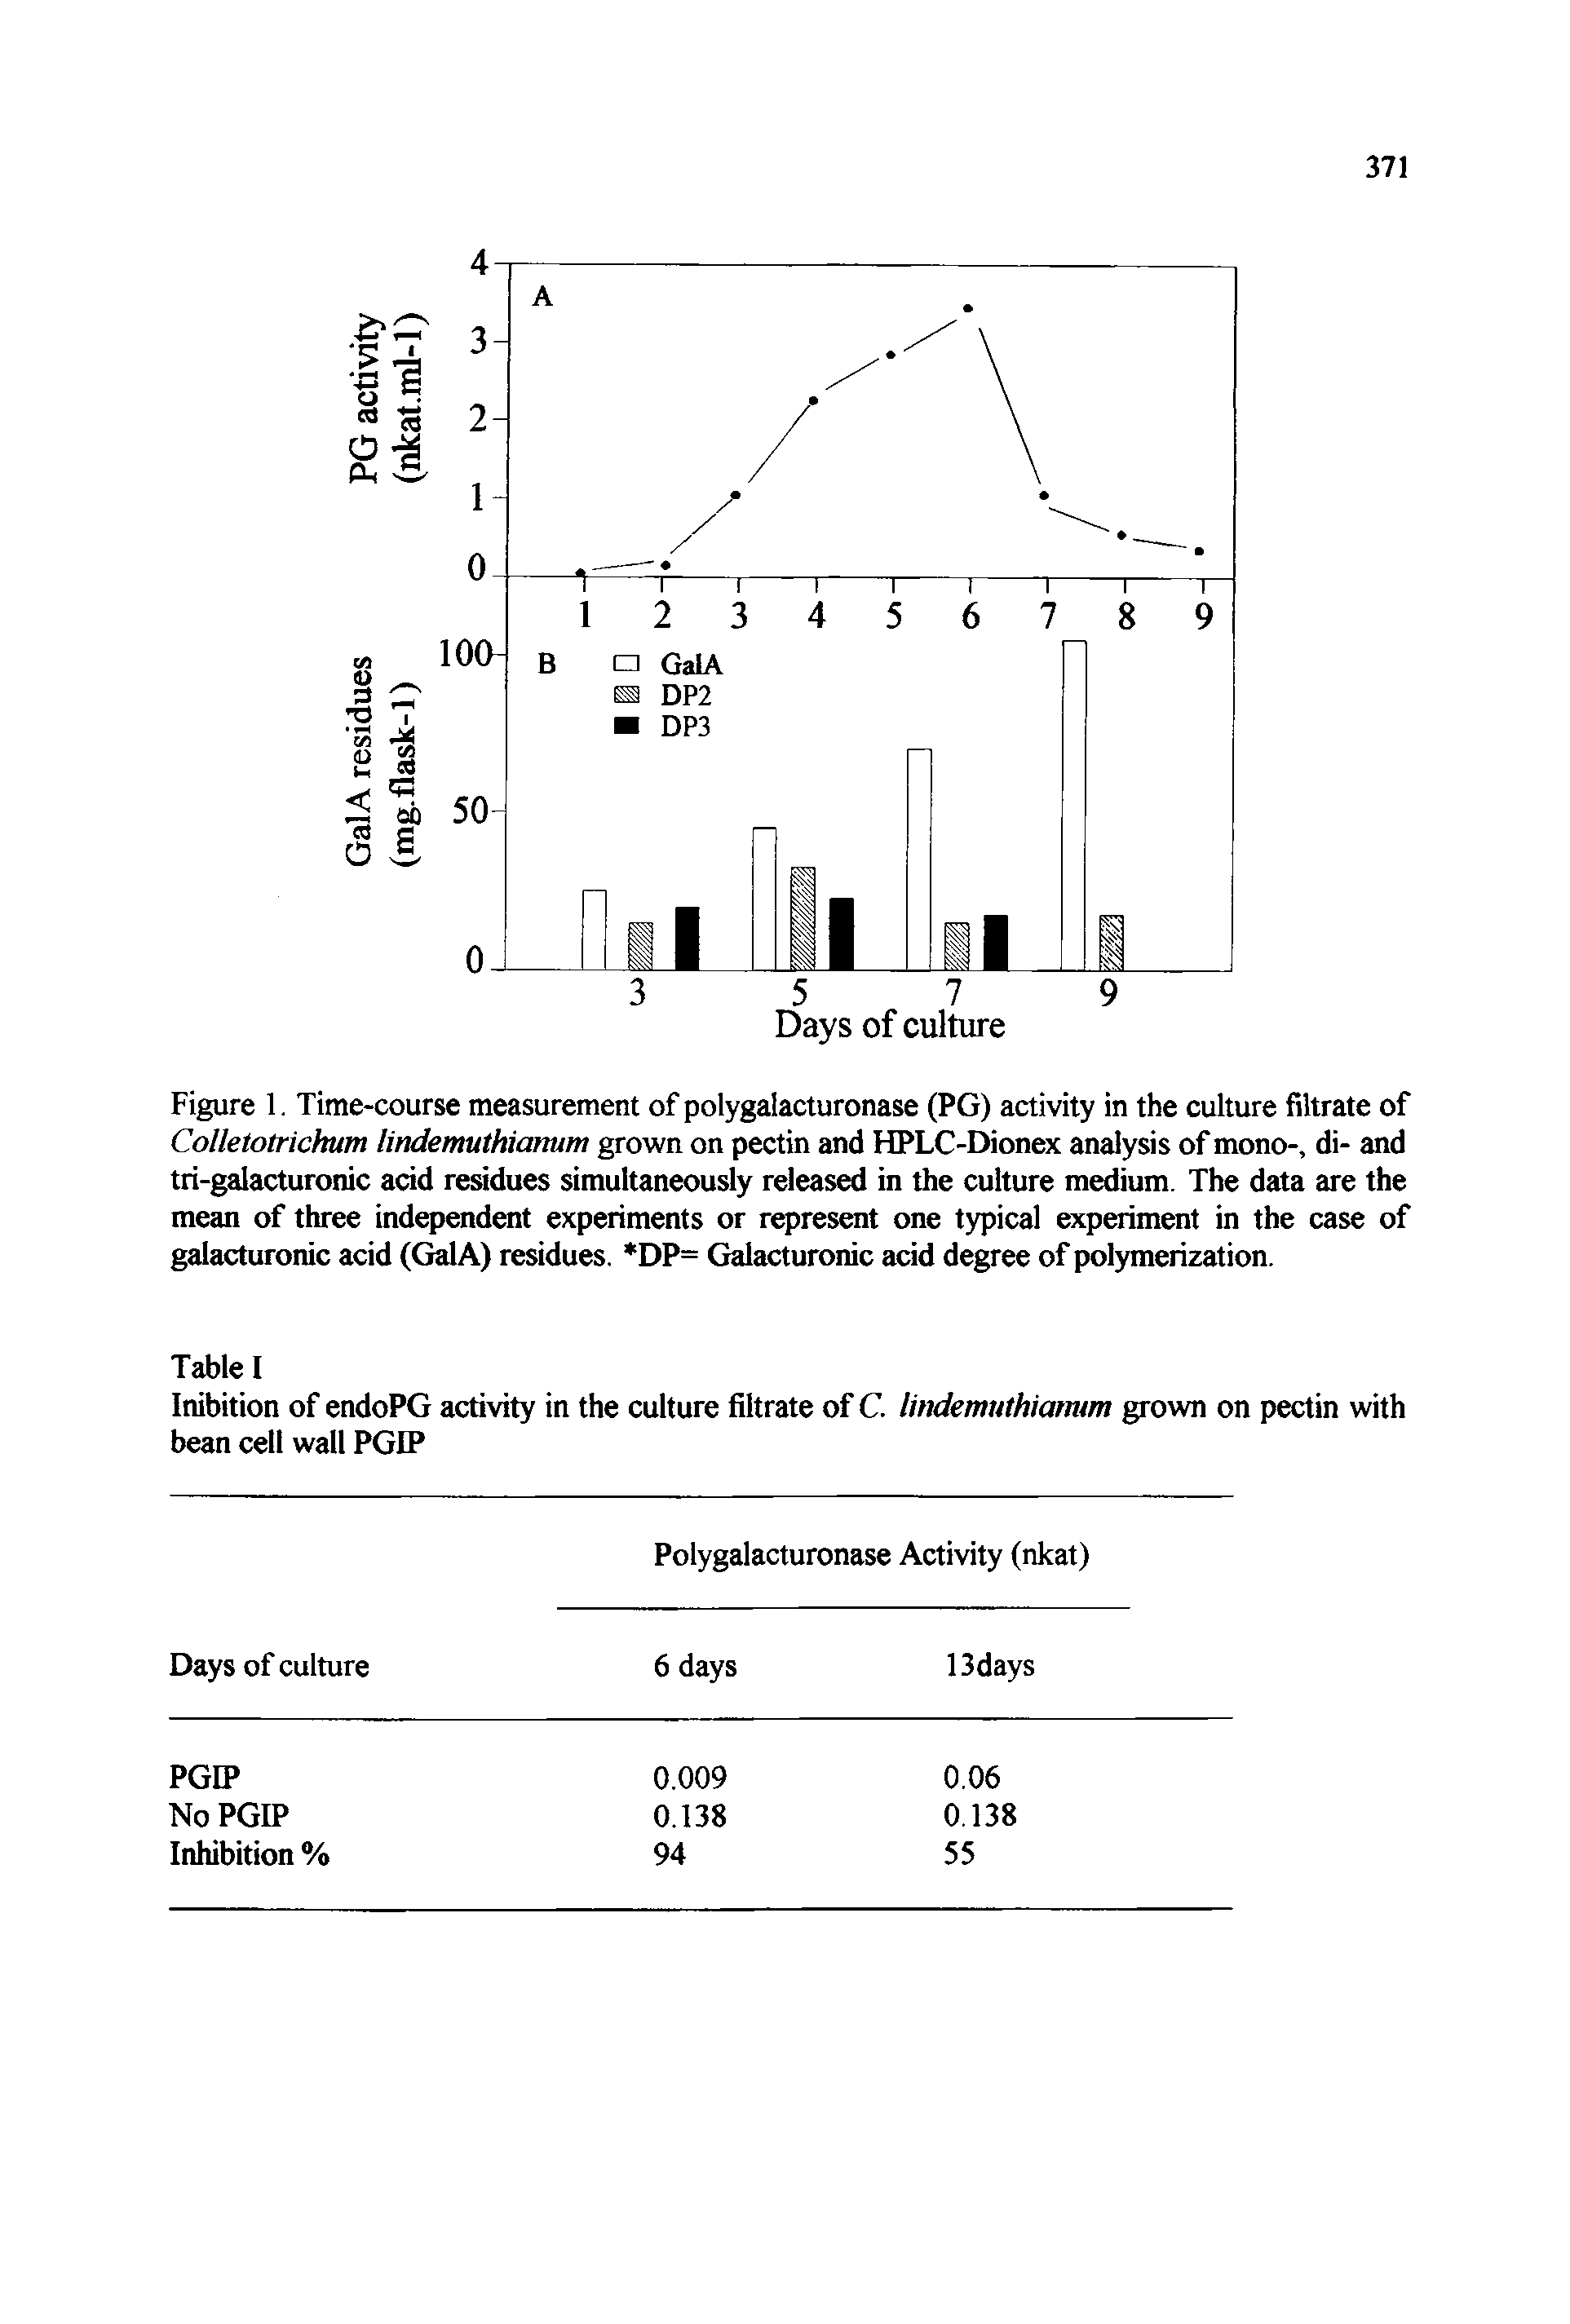 Figure 1. Time-course measurement of polygalacturonase (PG) activity in the culture filtrate of Colletotrichum lindemuthianum grown on pectin and HPLC-Dionex analysis of mono-, di- and tri-galacturonic acid residues simultaneously released in the culture medium. The data are the mean of three independent experiments or represent one typical experiment in the case of galacturonic acid (GalA) residues. DP= Galacturonic acid degree of polymerization.